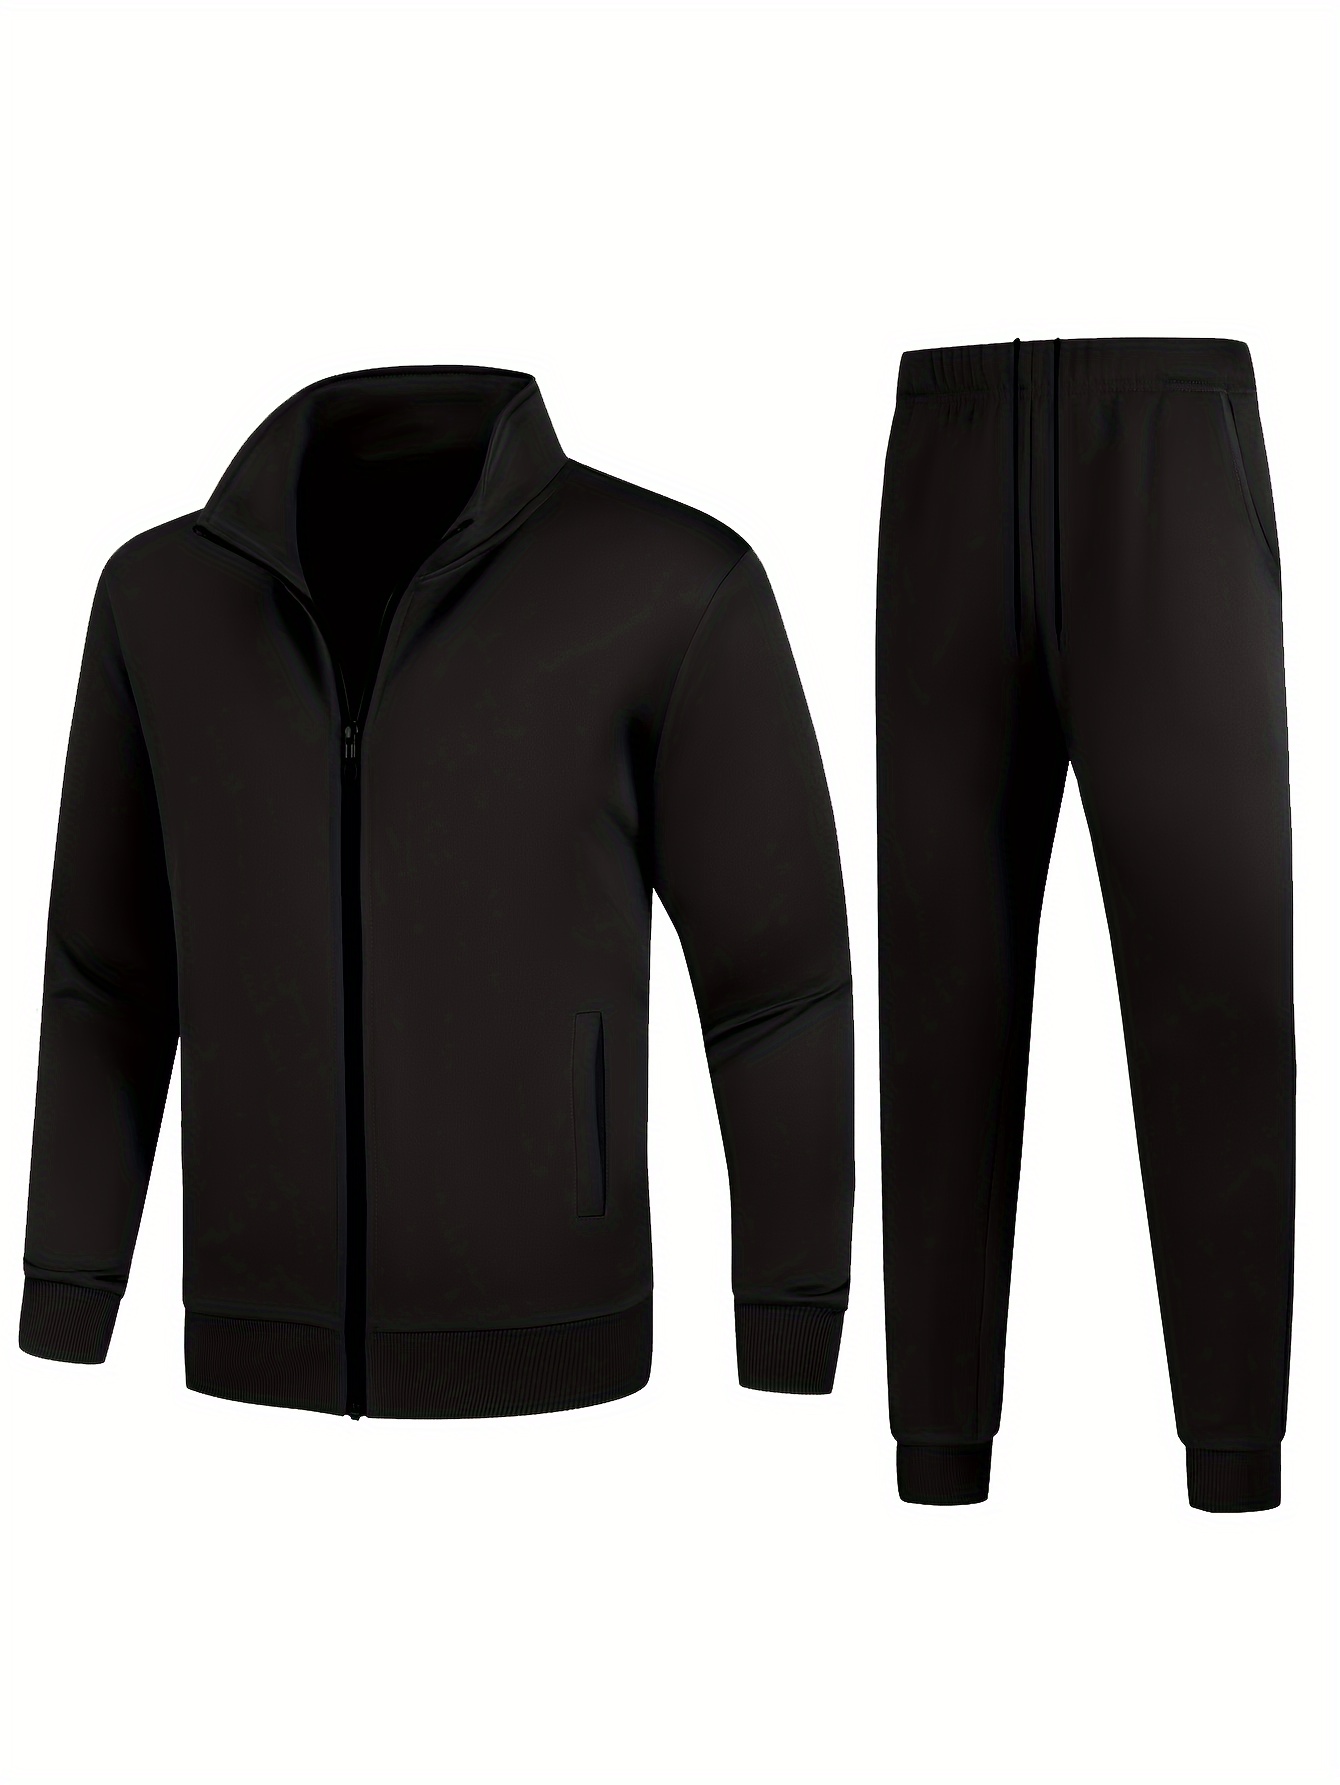 classic mens athletic 2pcs tracksuit set casual full zip long sleeve jacket and jogging pants set for gym workout running